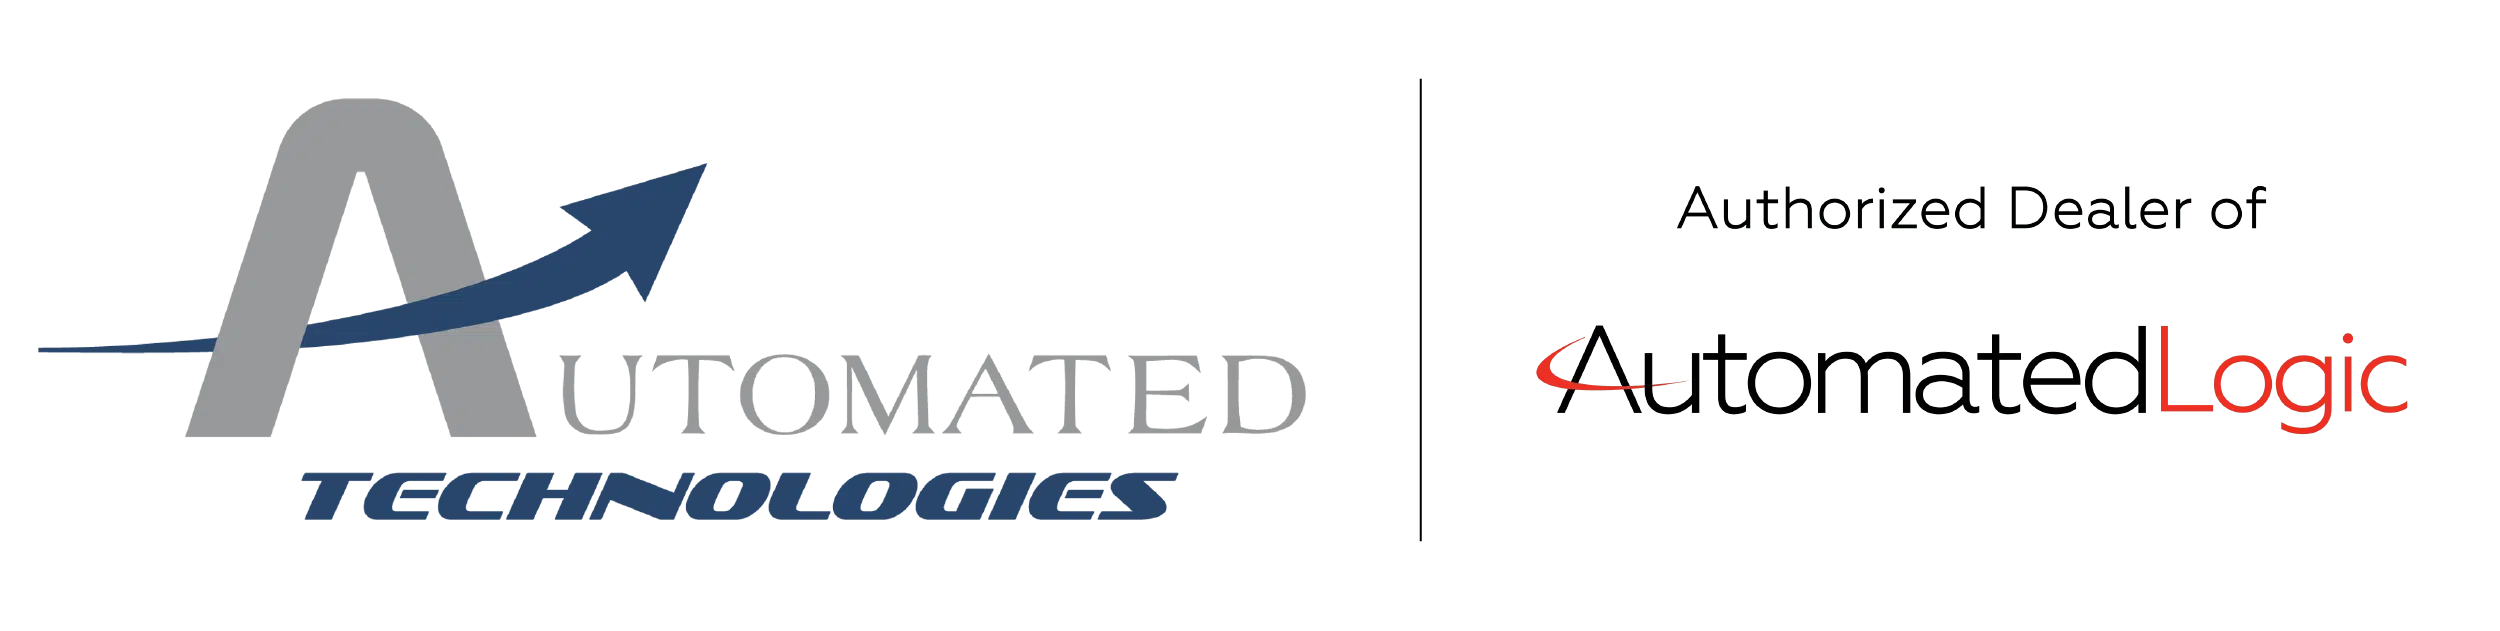 Combination Automated Technologies Logos